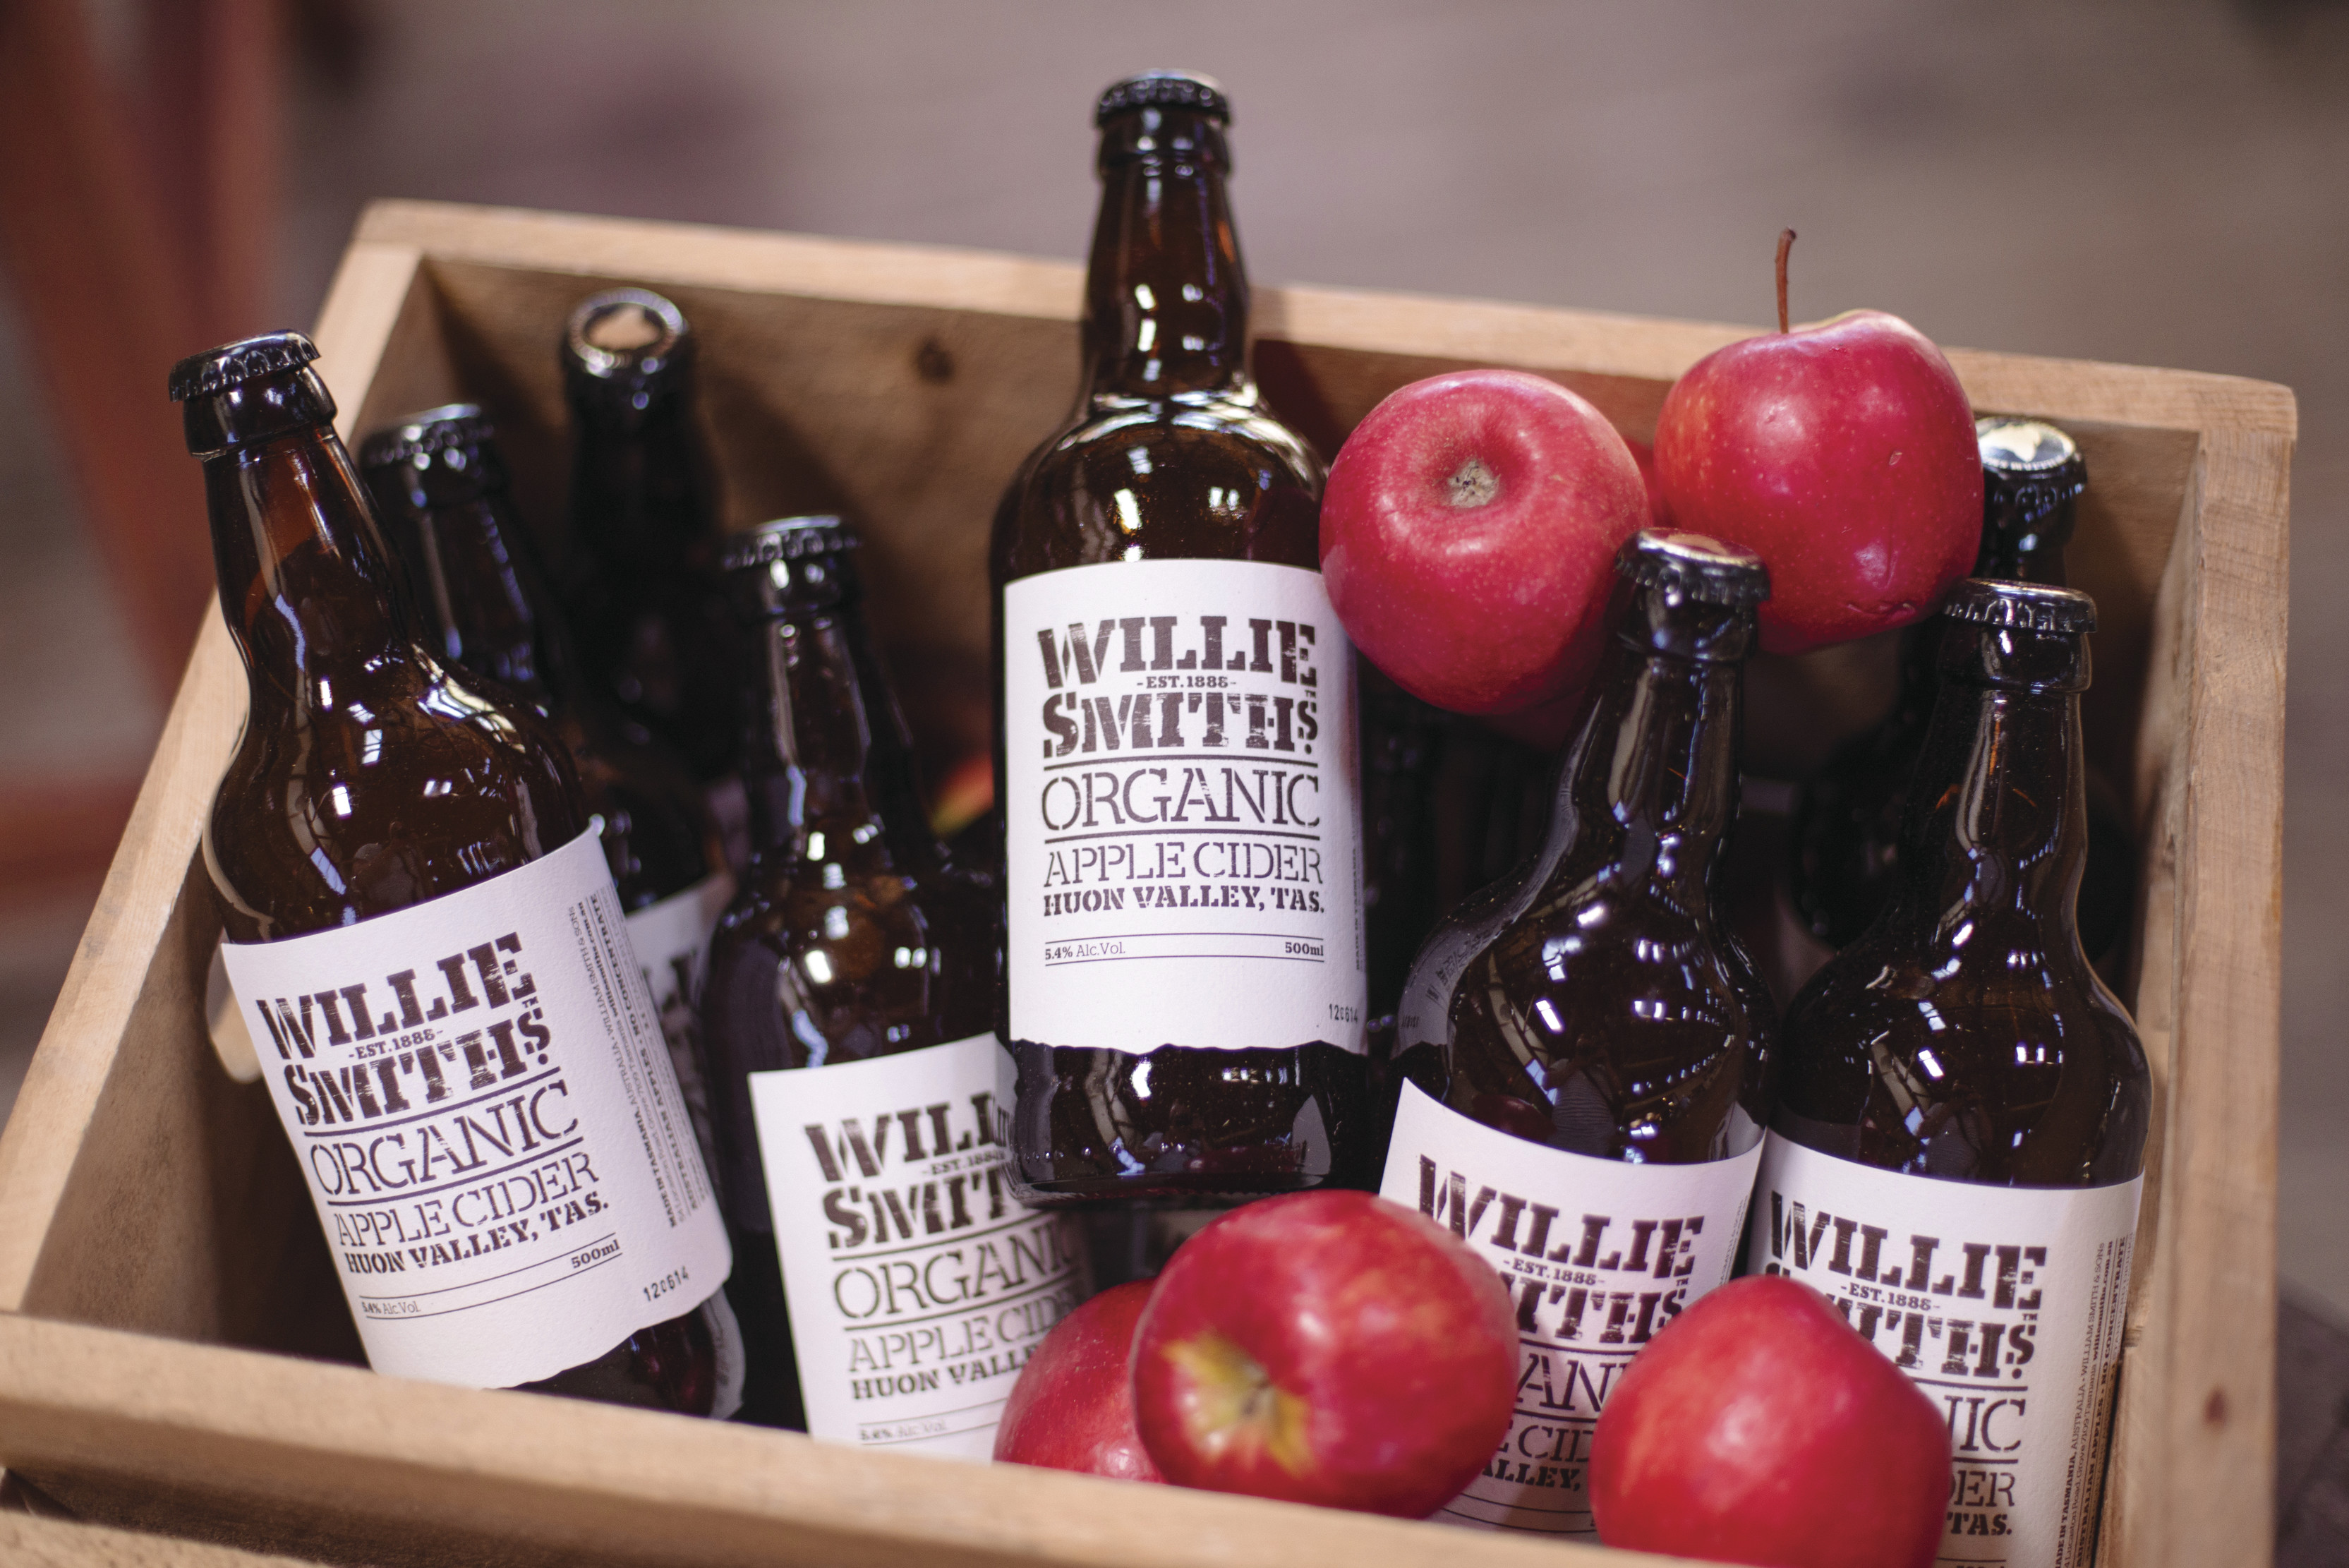 Close up image of bottles of cider and apples in a crate.